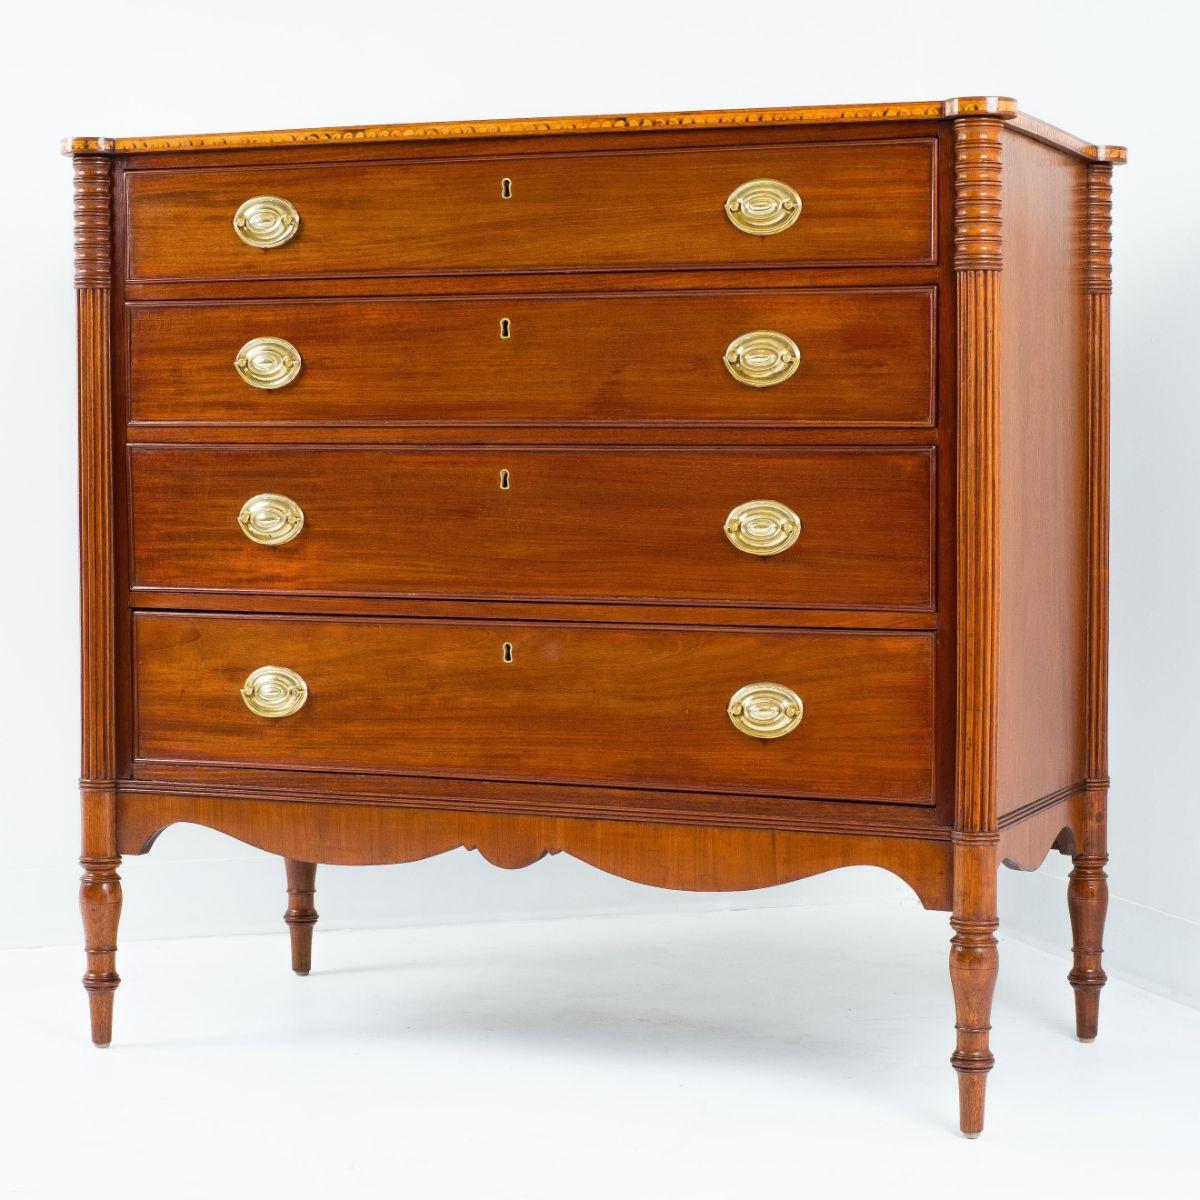 American Sheraton mahogany chest with graduated cock beaded drawers. The case top bears characteristic Seymour School lunette inlay on the edge of the single board mahogany top. The corners of the case are turreted with ring-turned dies over engaged